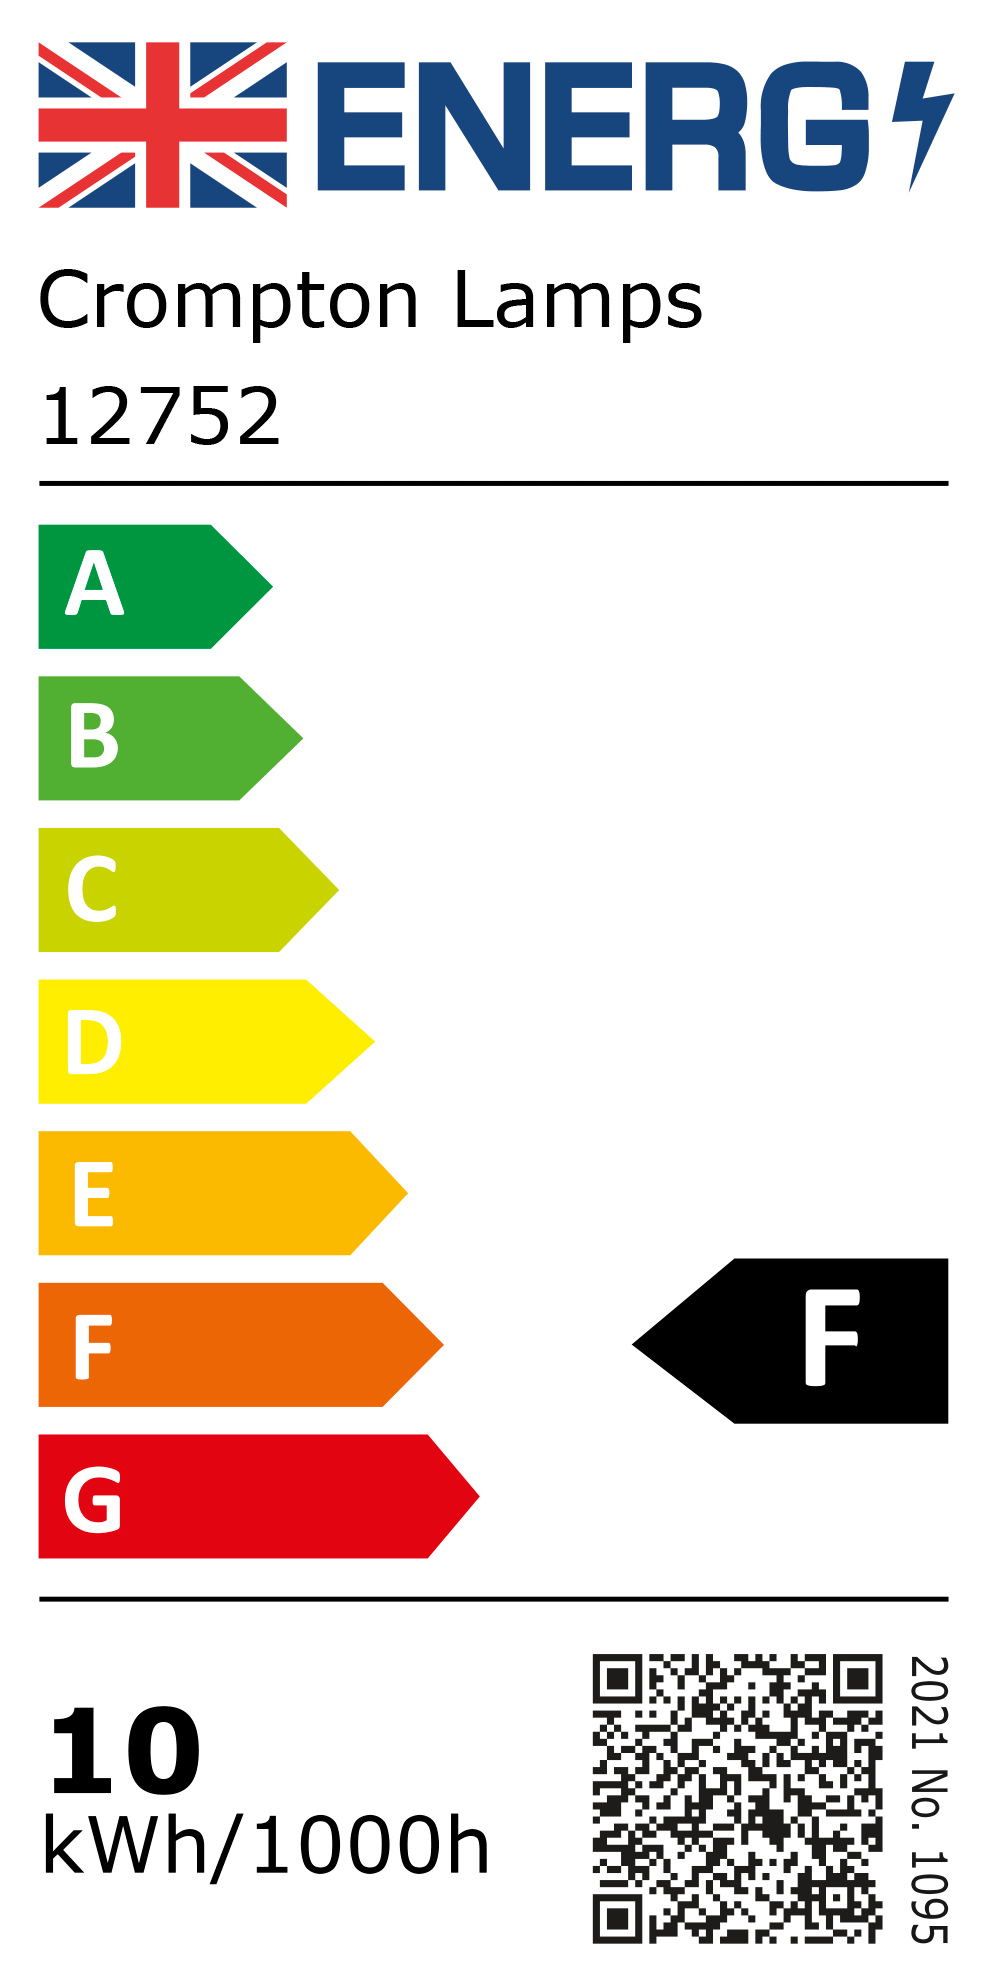 New 2021 Energy Rating Label: Stock Code 12752